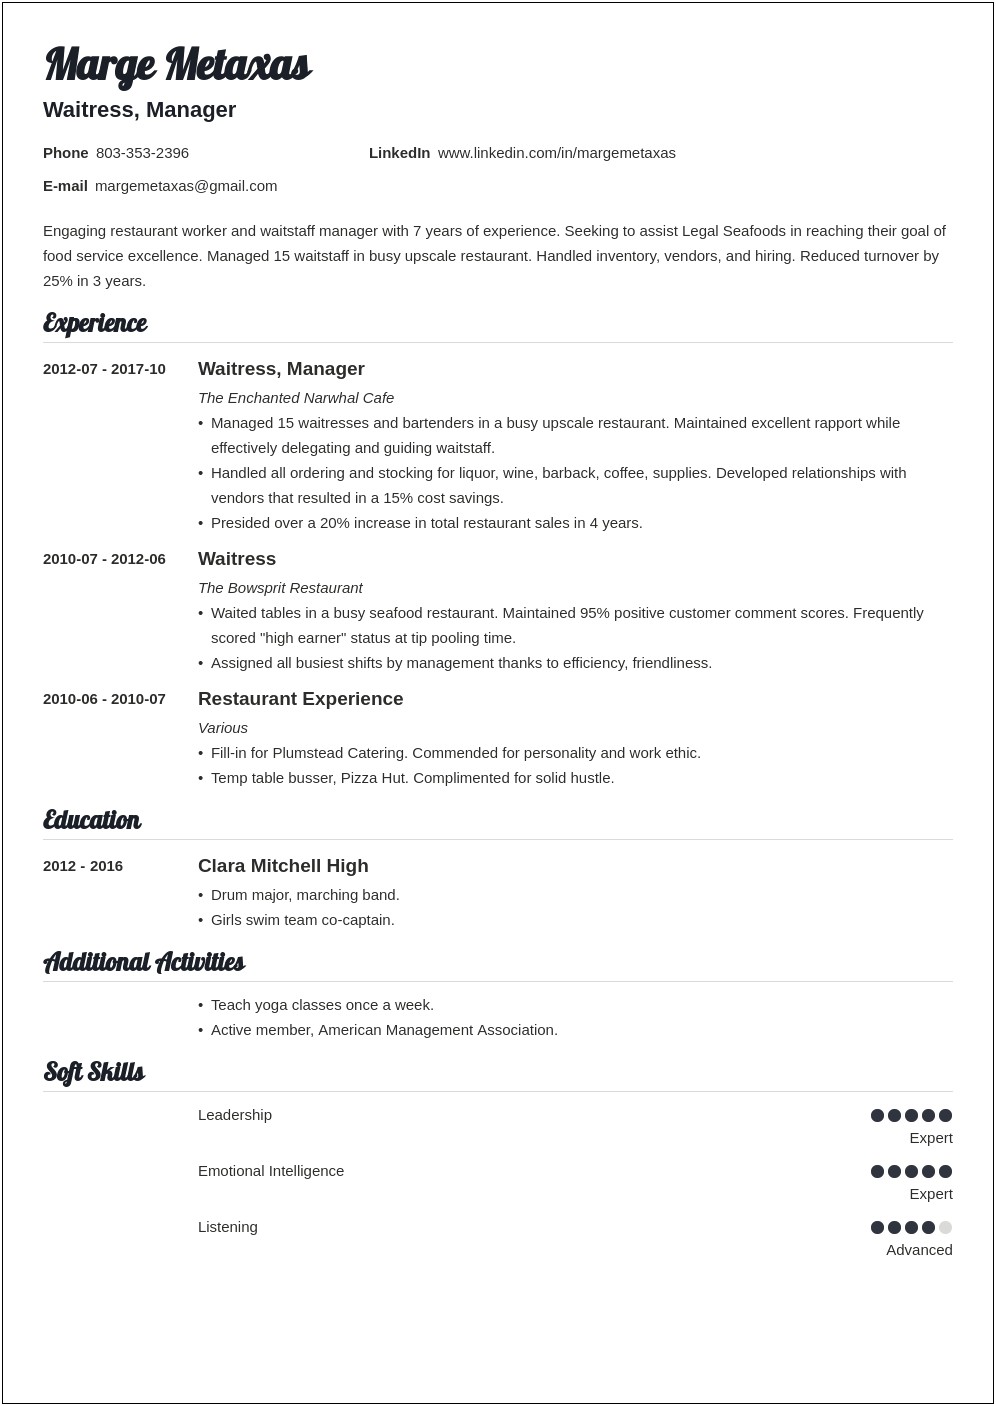 Resume To Work At A Restaurant